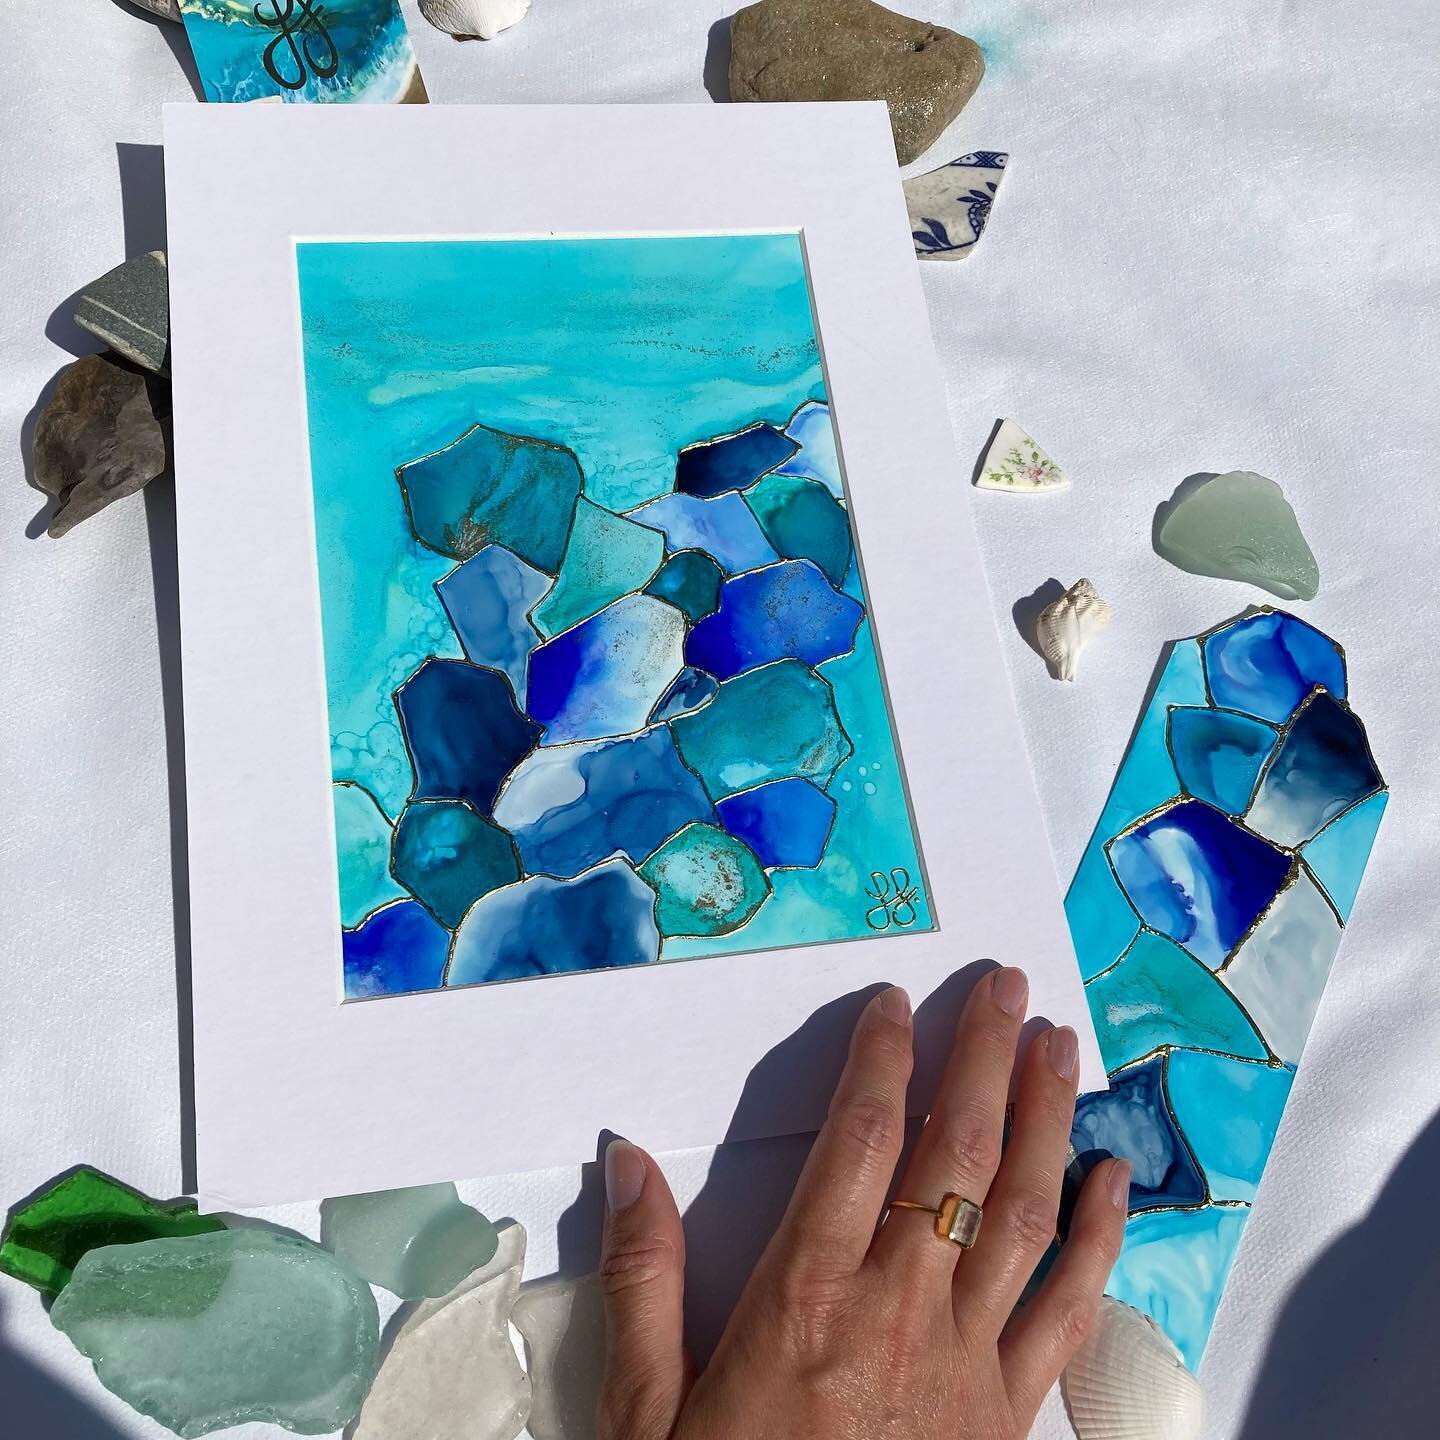 🌊 B e a c h  T r e a s u r e ✨

Inspired by my love of collecting sea glass when I&rsquo;m at the beach ☺️ This is the first painting that I showed in my last reel. Thank you for all the lovely feedback about this work! 🥰 Judging by all the comment